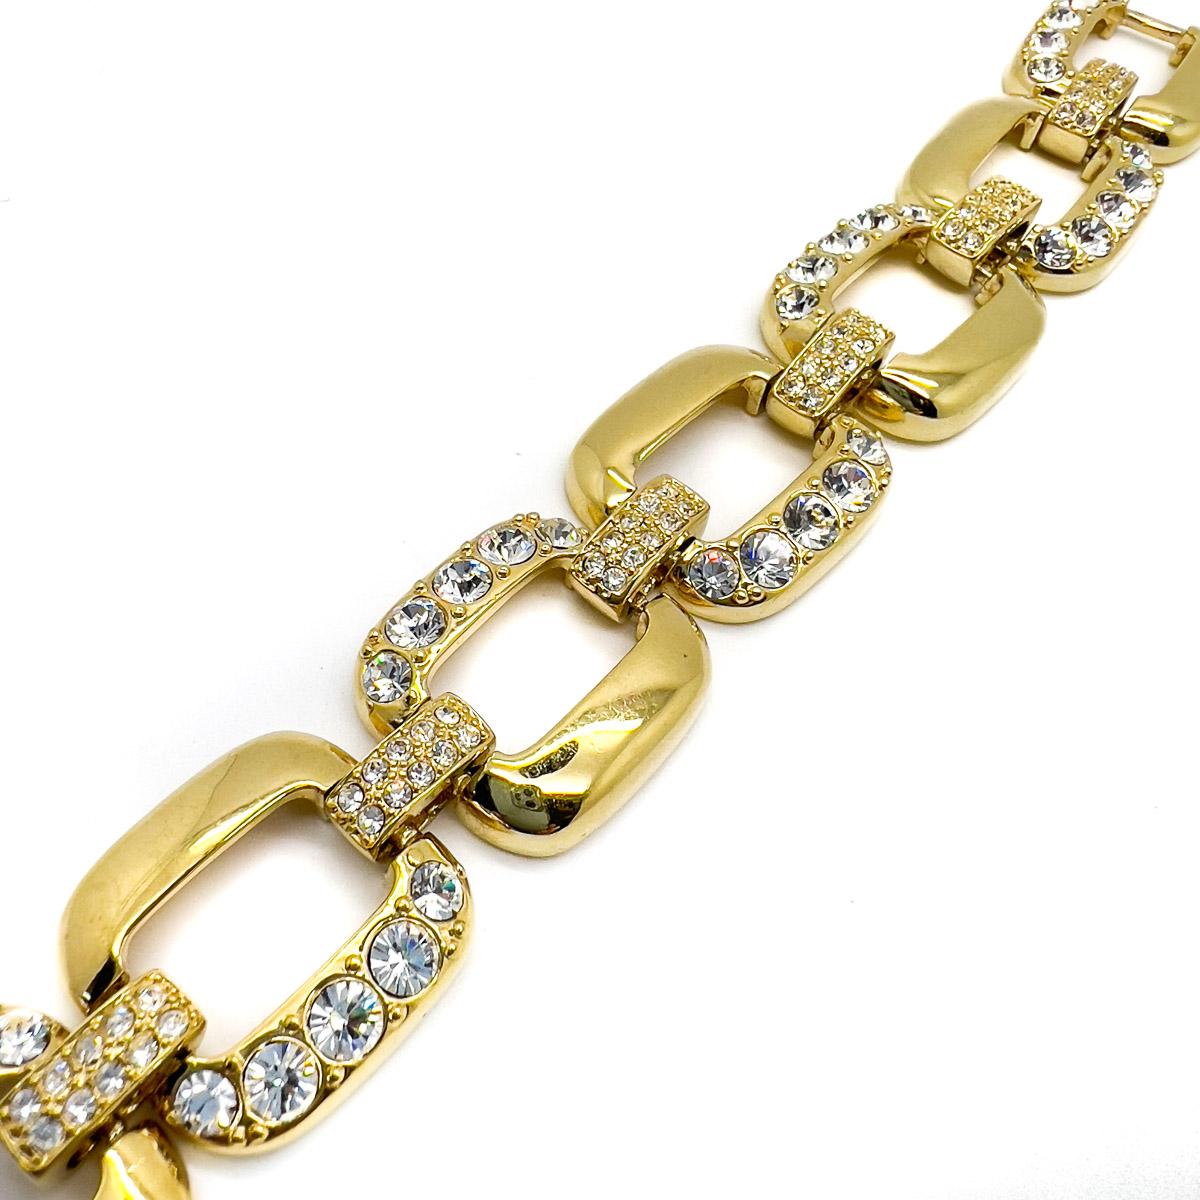 A vintage Crystal Link Bracelet.
An unsigned beauty. A rare treasure. Just because a jewel doesn’t carry a designer name, doesn’t mean it isn't coveted. The unsigned beauties in our collection are sourced specifically by Jennifer for their standout